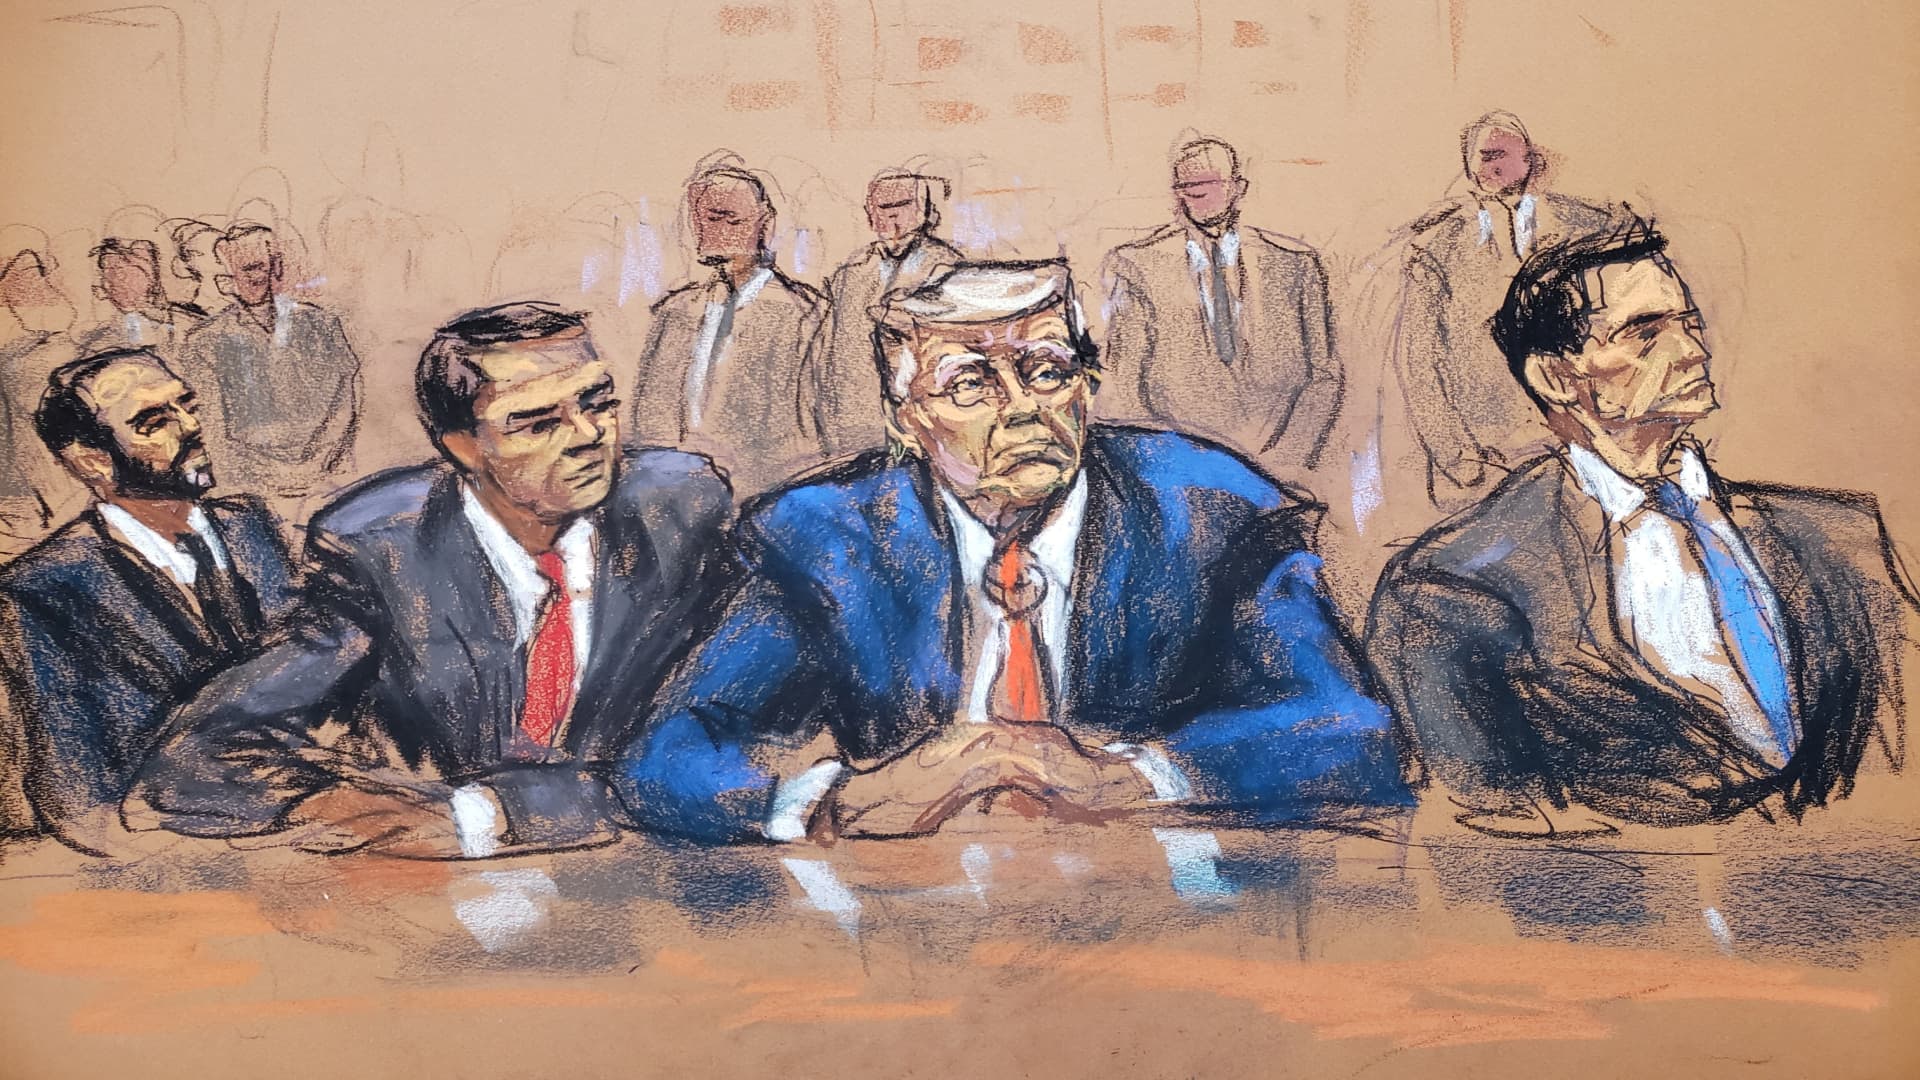 Former U.S. President Donald Trump sits between his attorneys Todd Blanche and John Lauro as he faces charges before Magistrate Judge Moxila A. Upadhyaya that he orchestrated a plot to try to overturn his 2020 election loss, at federal court in Washington, U.S. August 3, 2023 in a courtroom sketch. At far left is U.S. Special Counsel Jack Smith. 